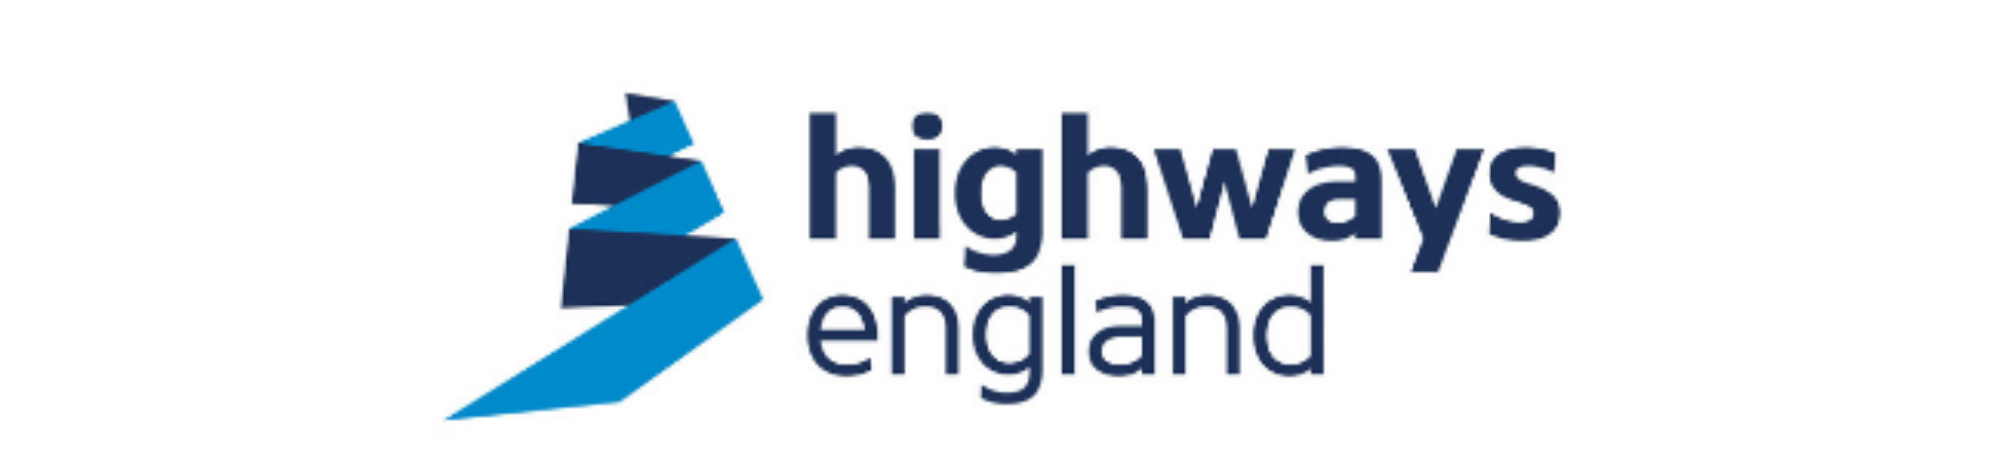 Highways England’s Creative COVID-19 Solutions